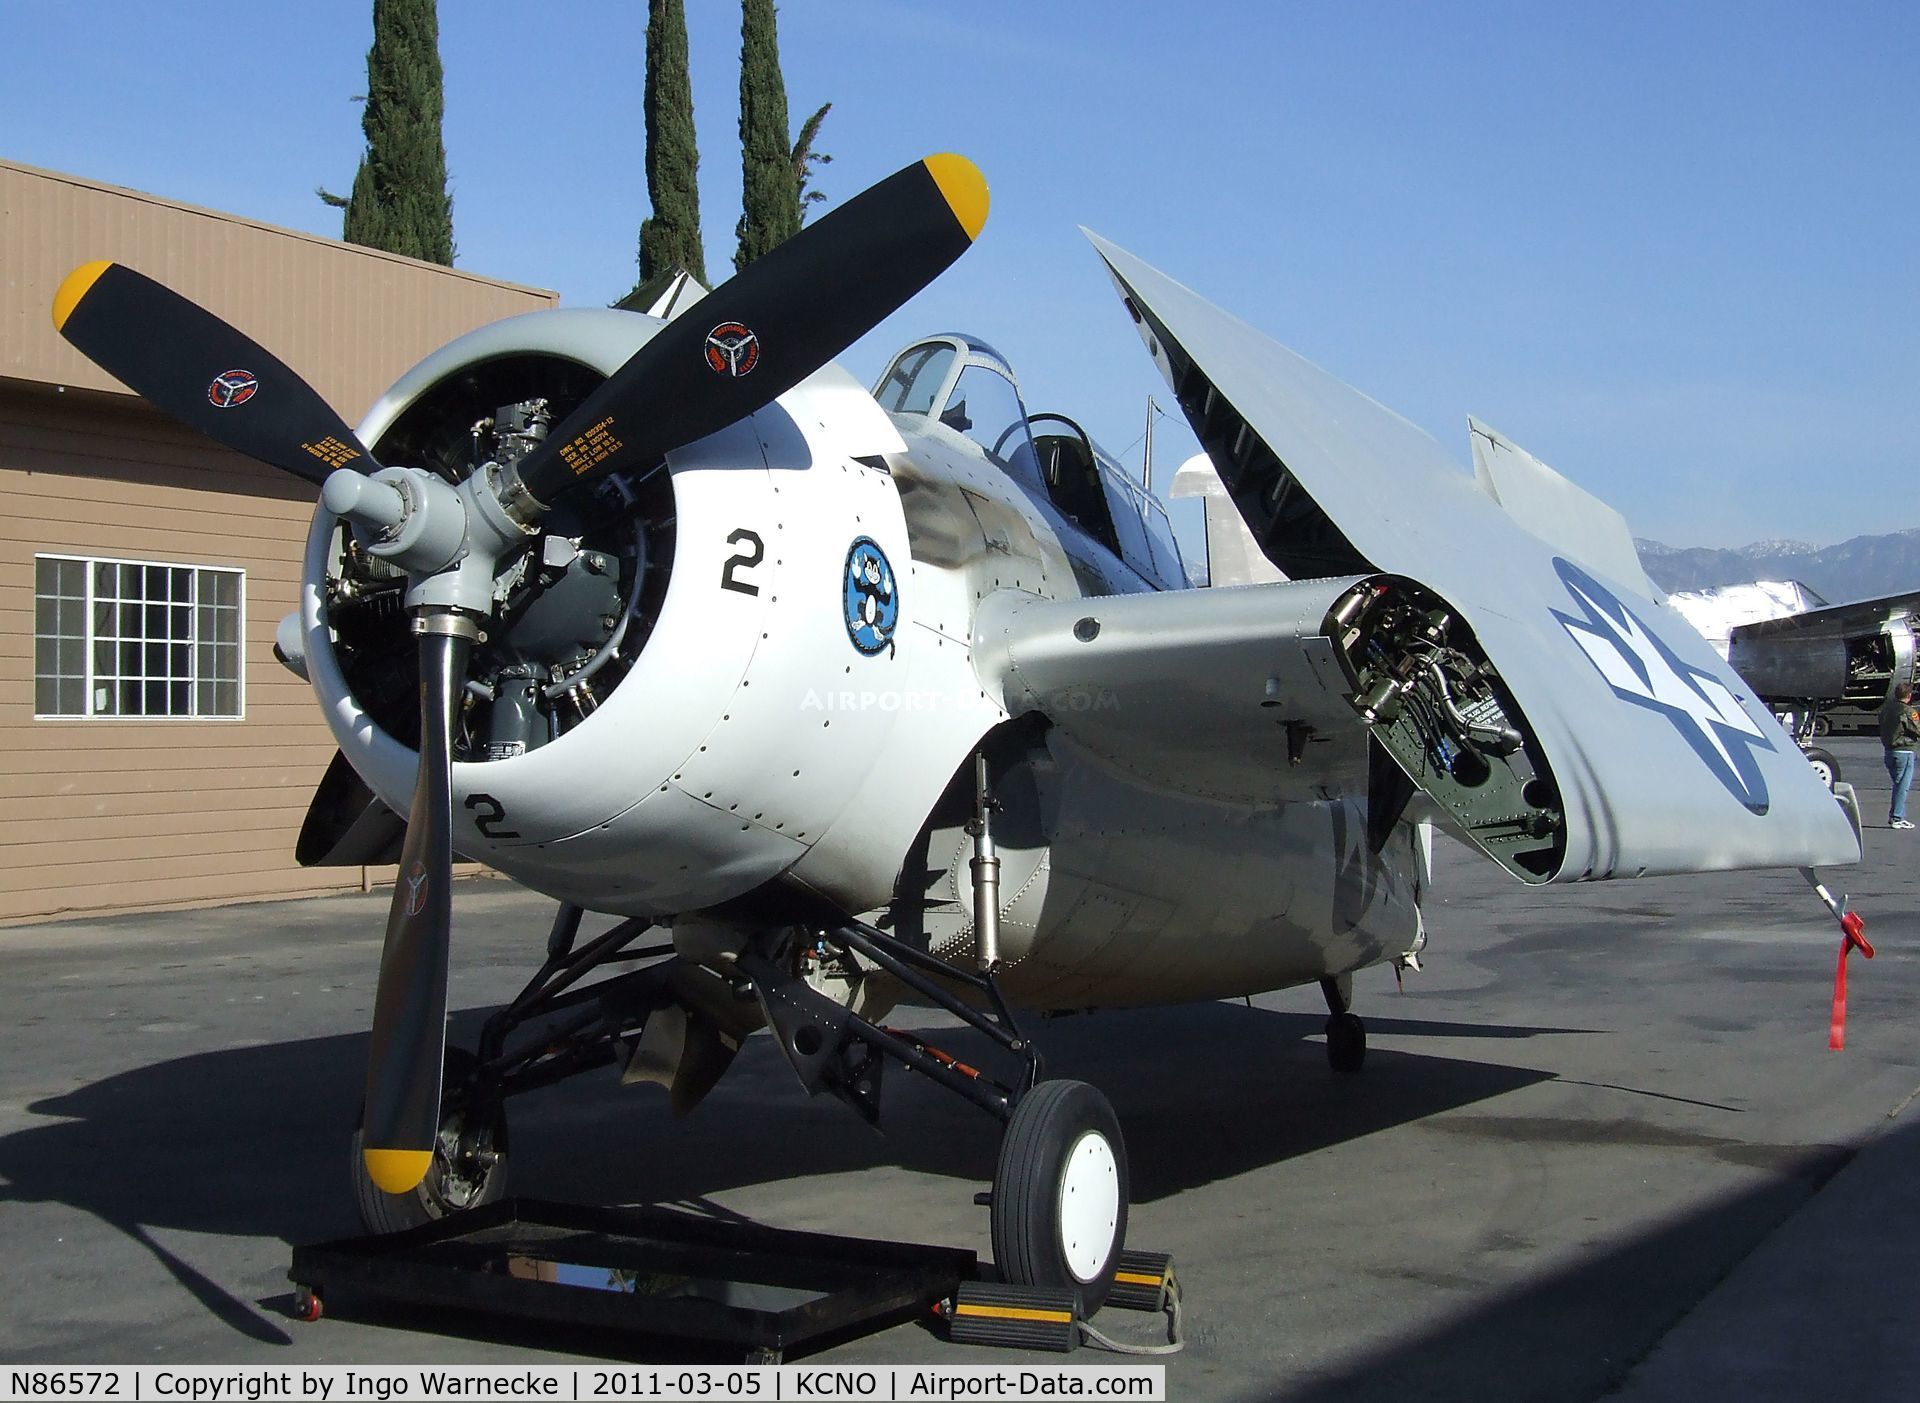 N86572, General Motors (Grumman) FM-2 Wildcat C/N 5626, Grumman (General Motors) FM-2 (F4F) Wildcat visiting for a lecture and flight demonstration at the Planes of Fame Museum, Chino CA